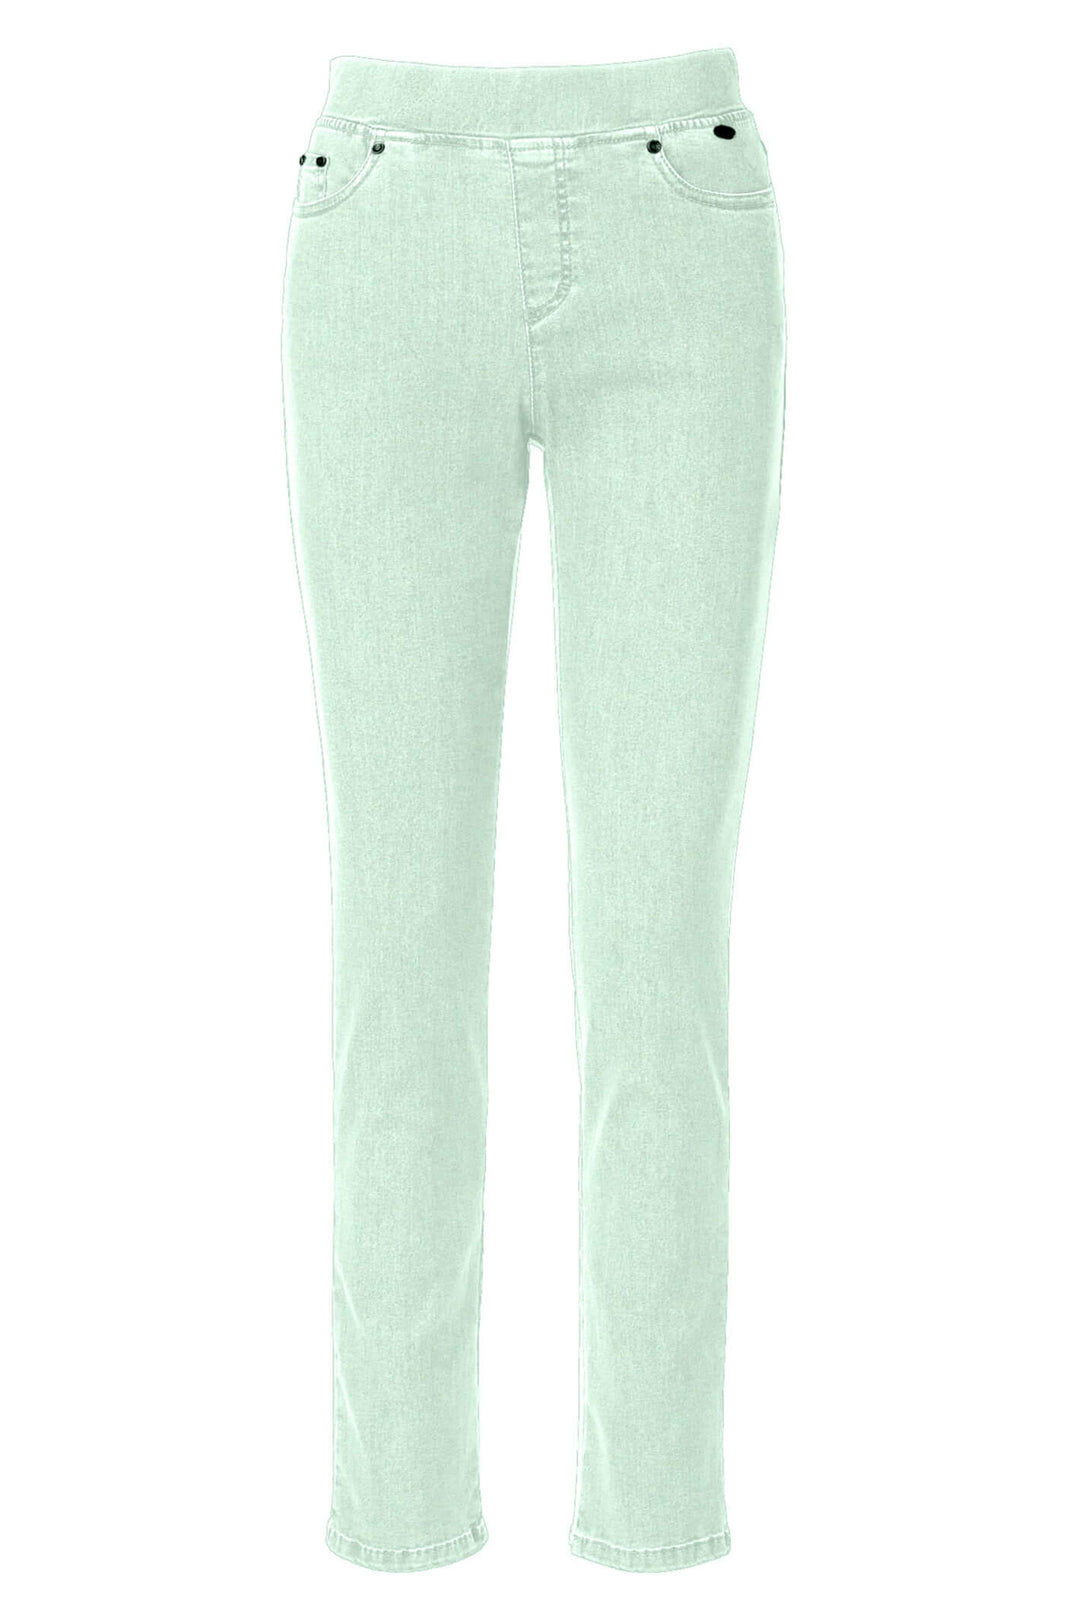 Anna Montana Angelika 1001 130 Mint Green Pull-On Jeans - Shirley Allum Boutique